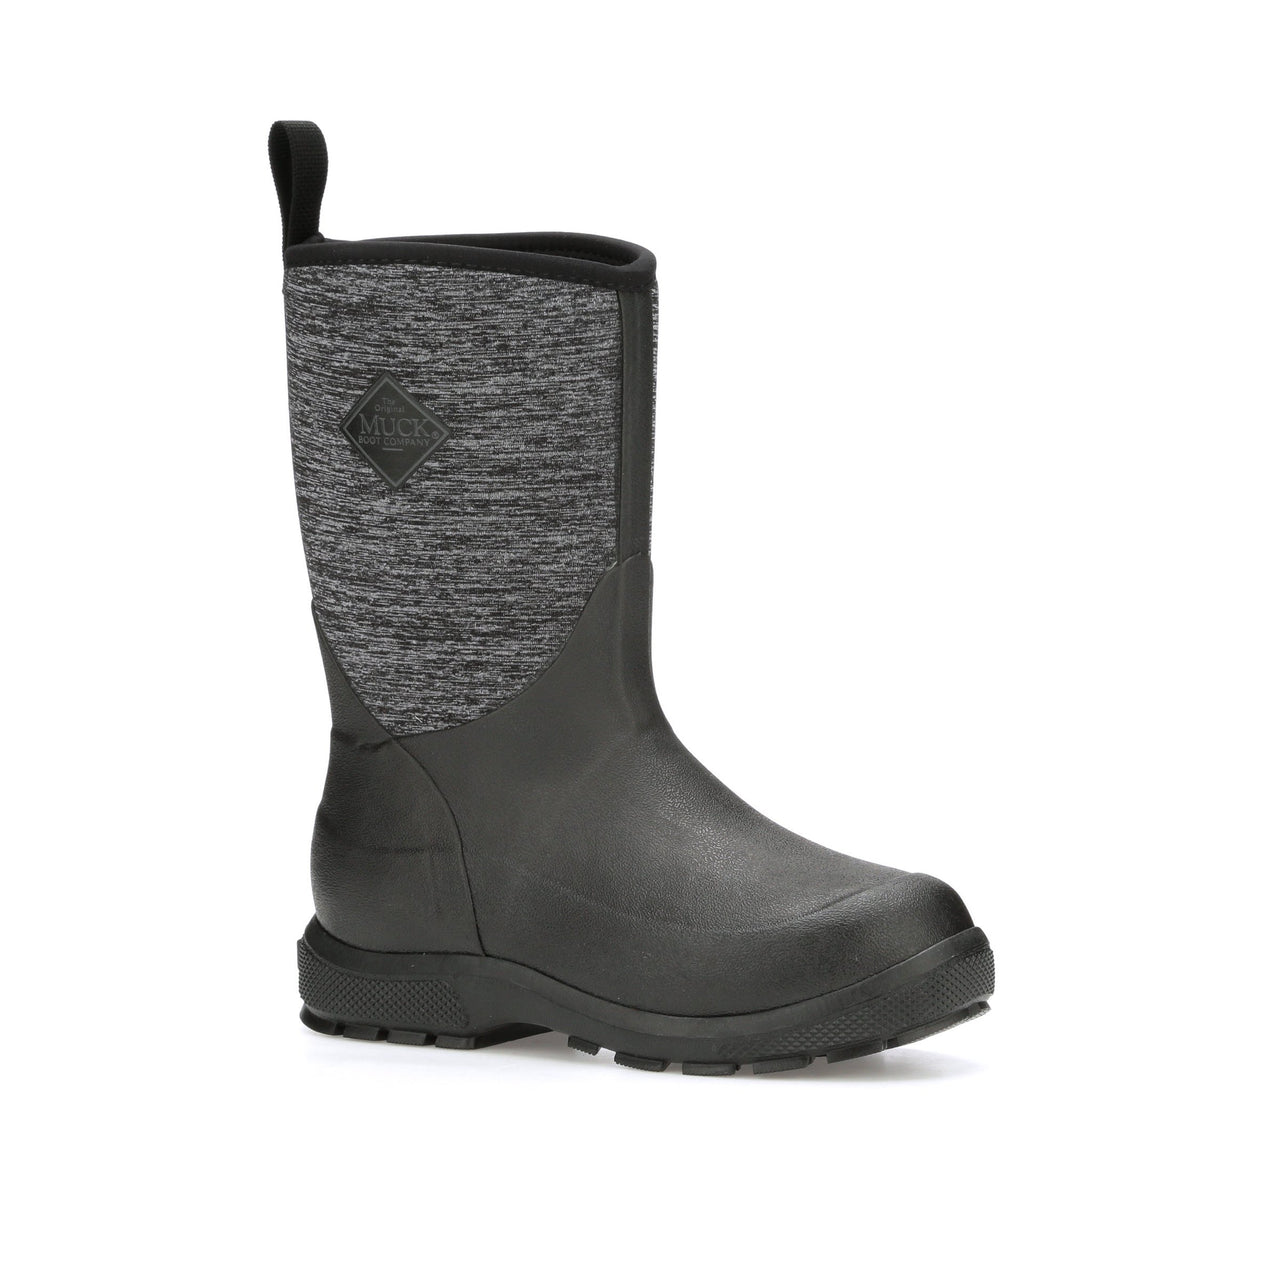 Muck Boots Kids Element Boots - Black/Heathered Jersey